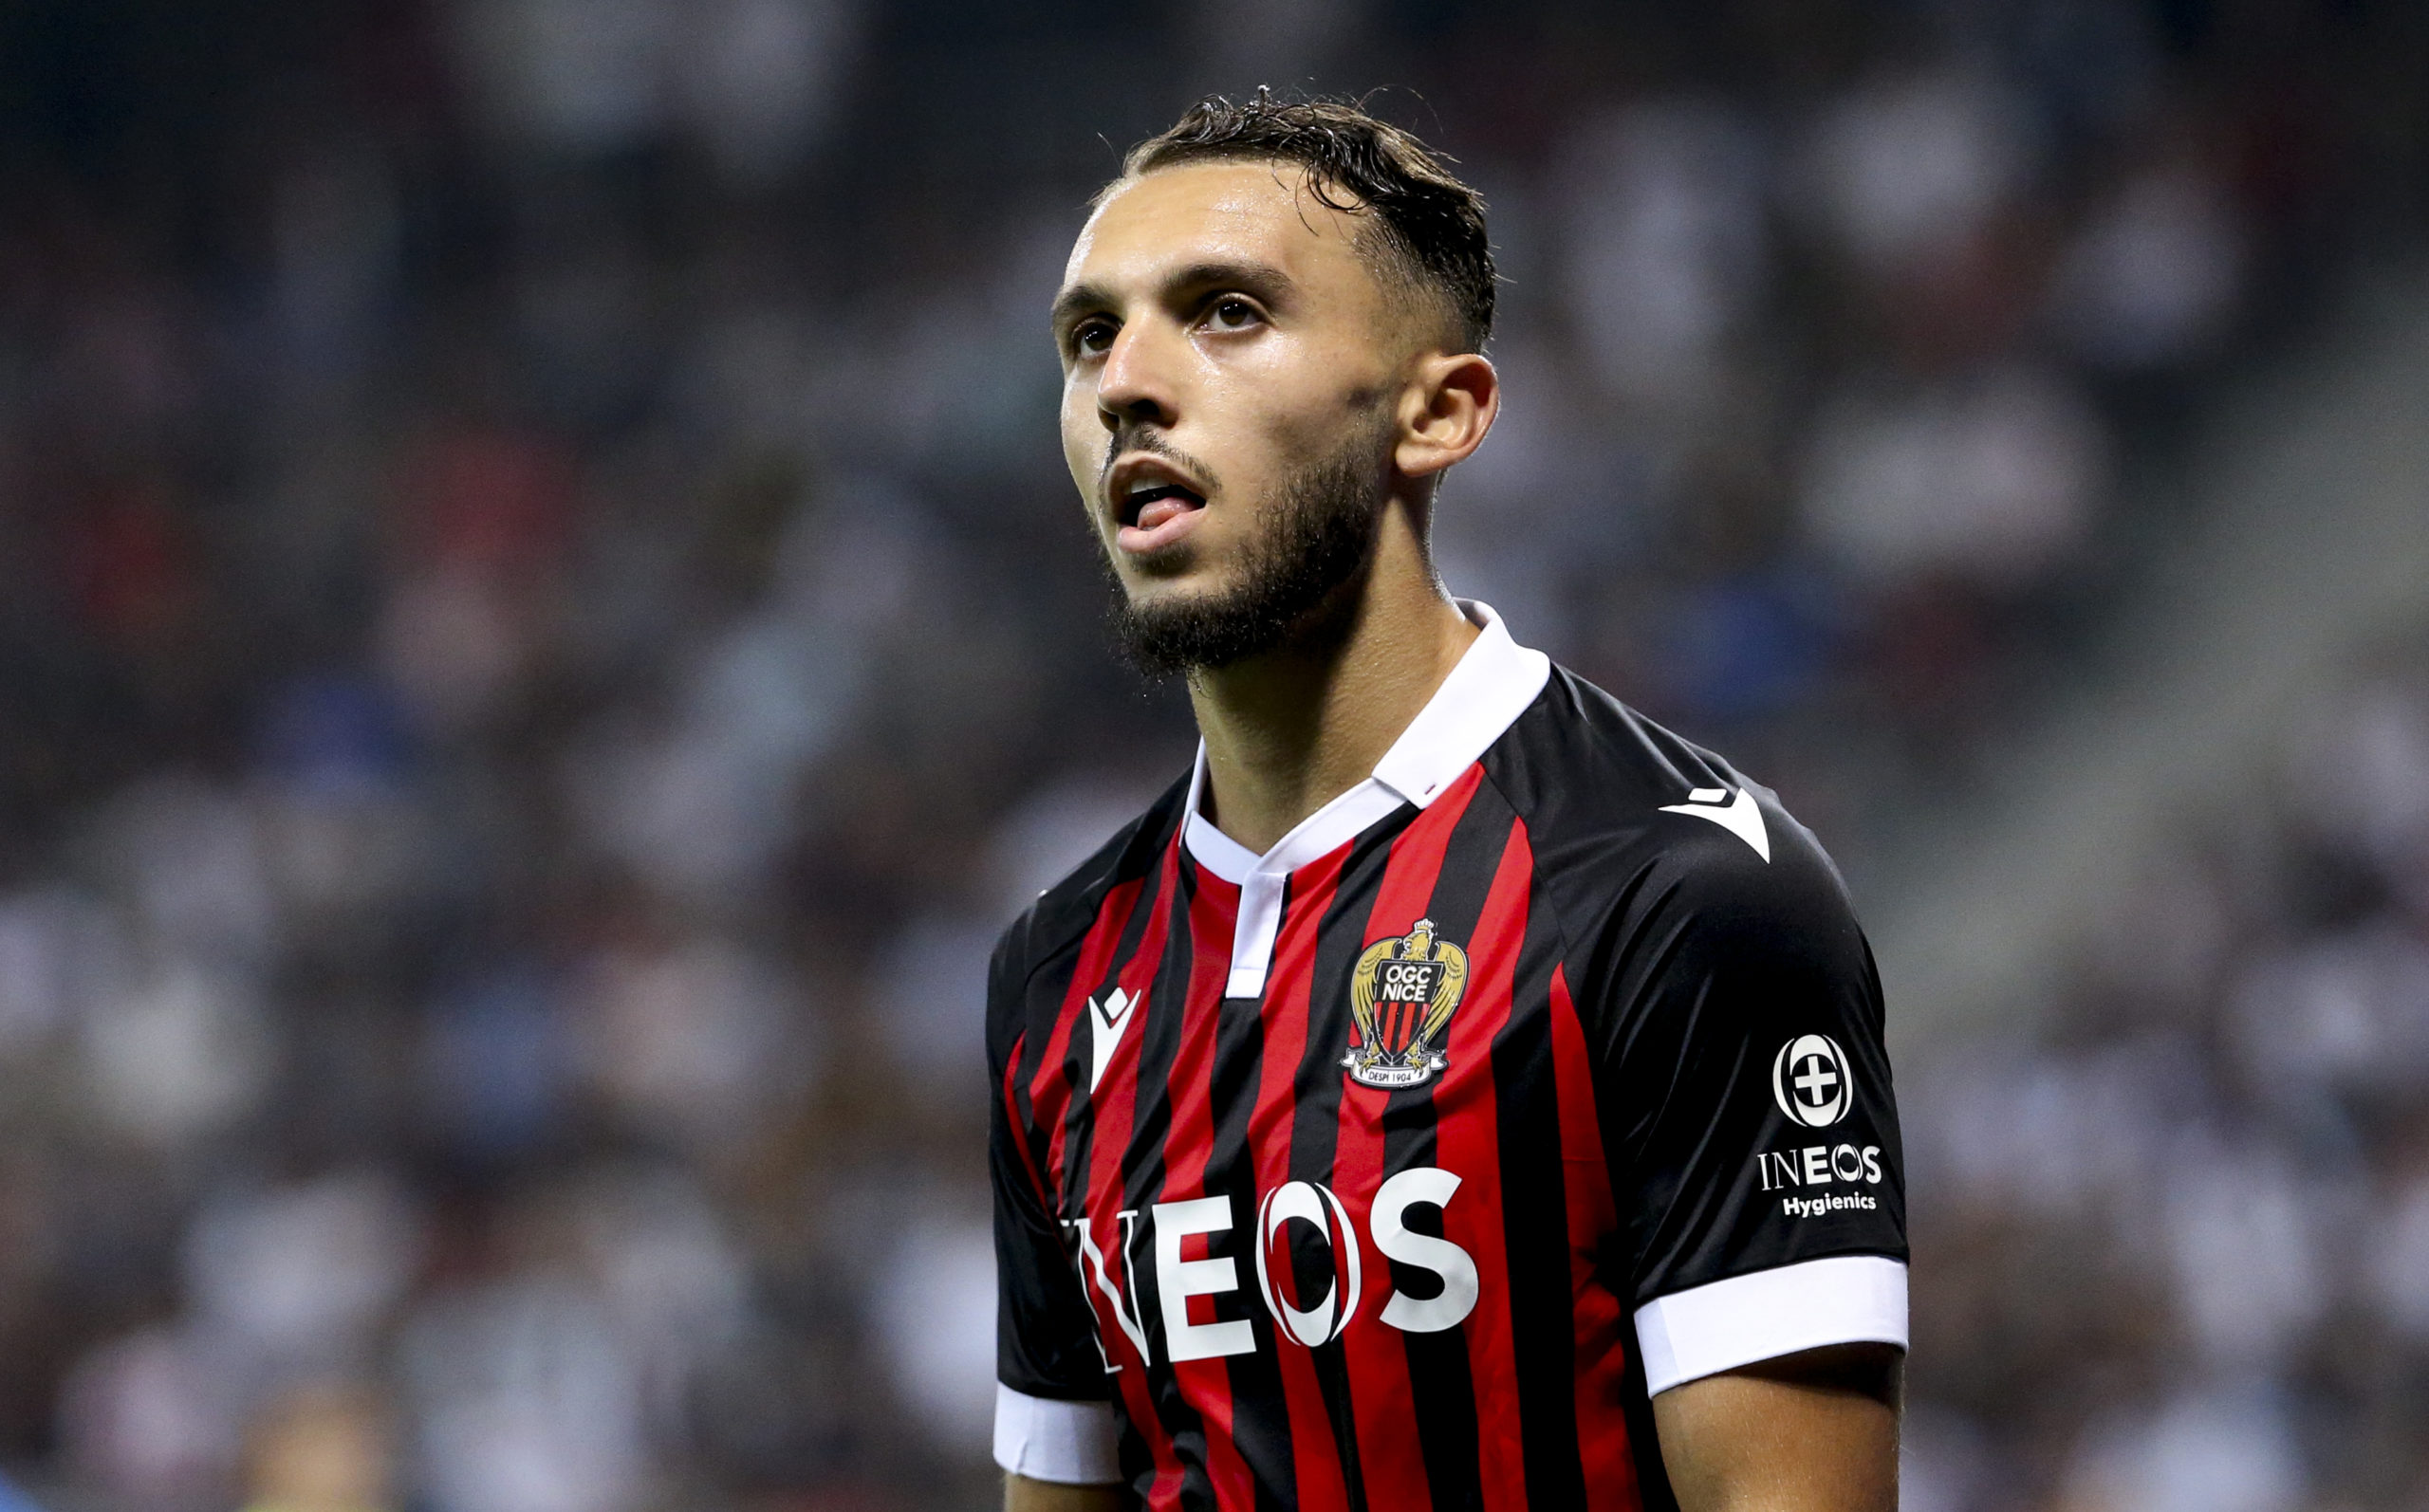 Amine Gouiri was on fire for Nice last night in the Coupe de France